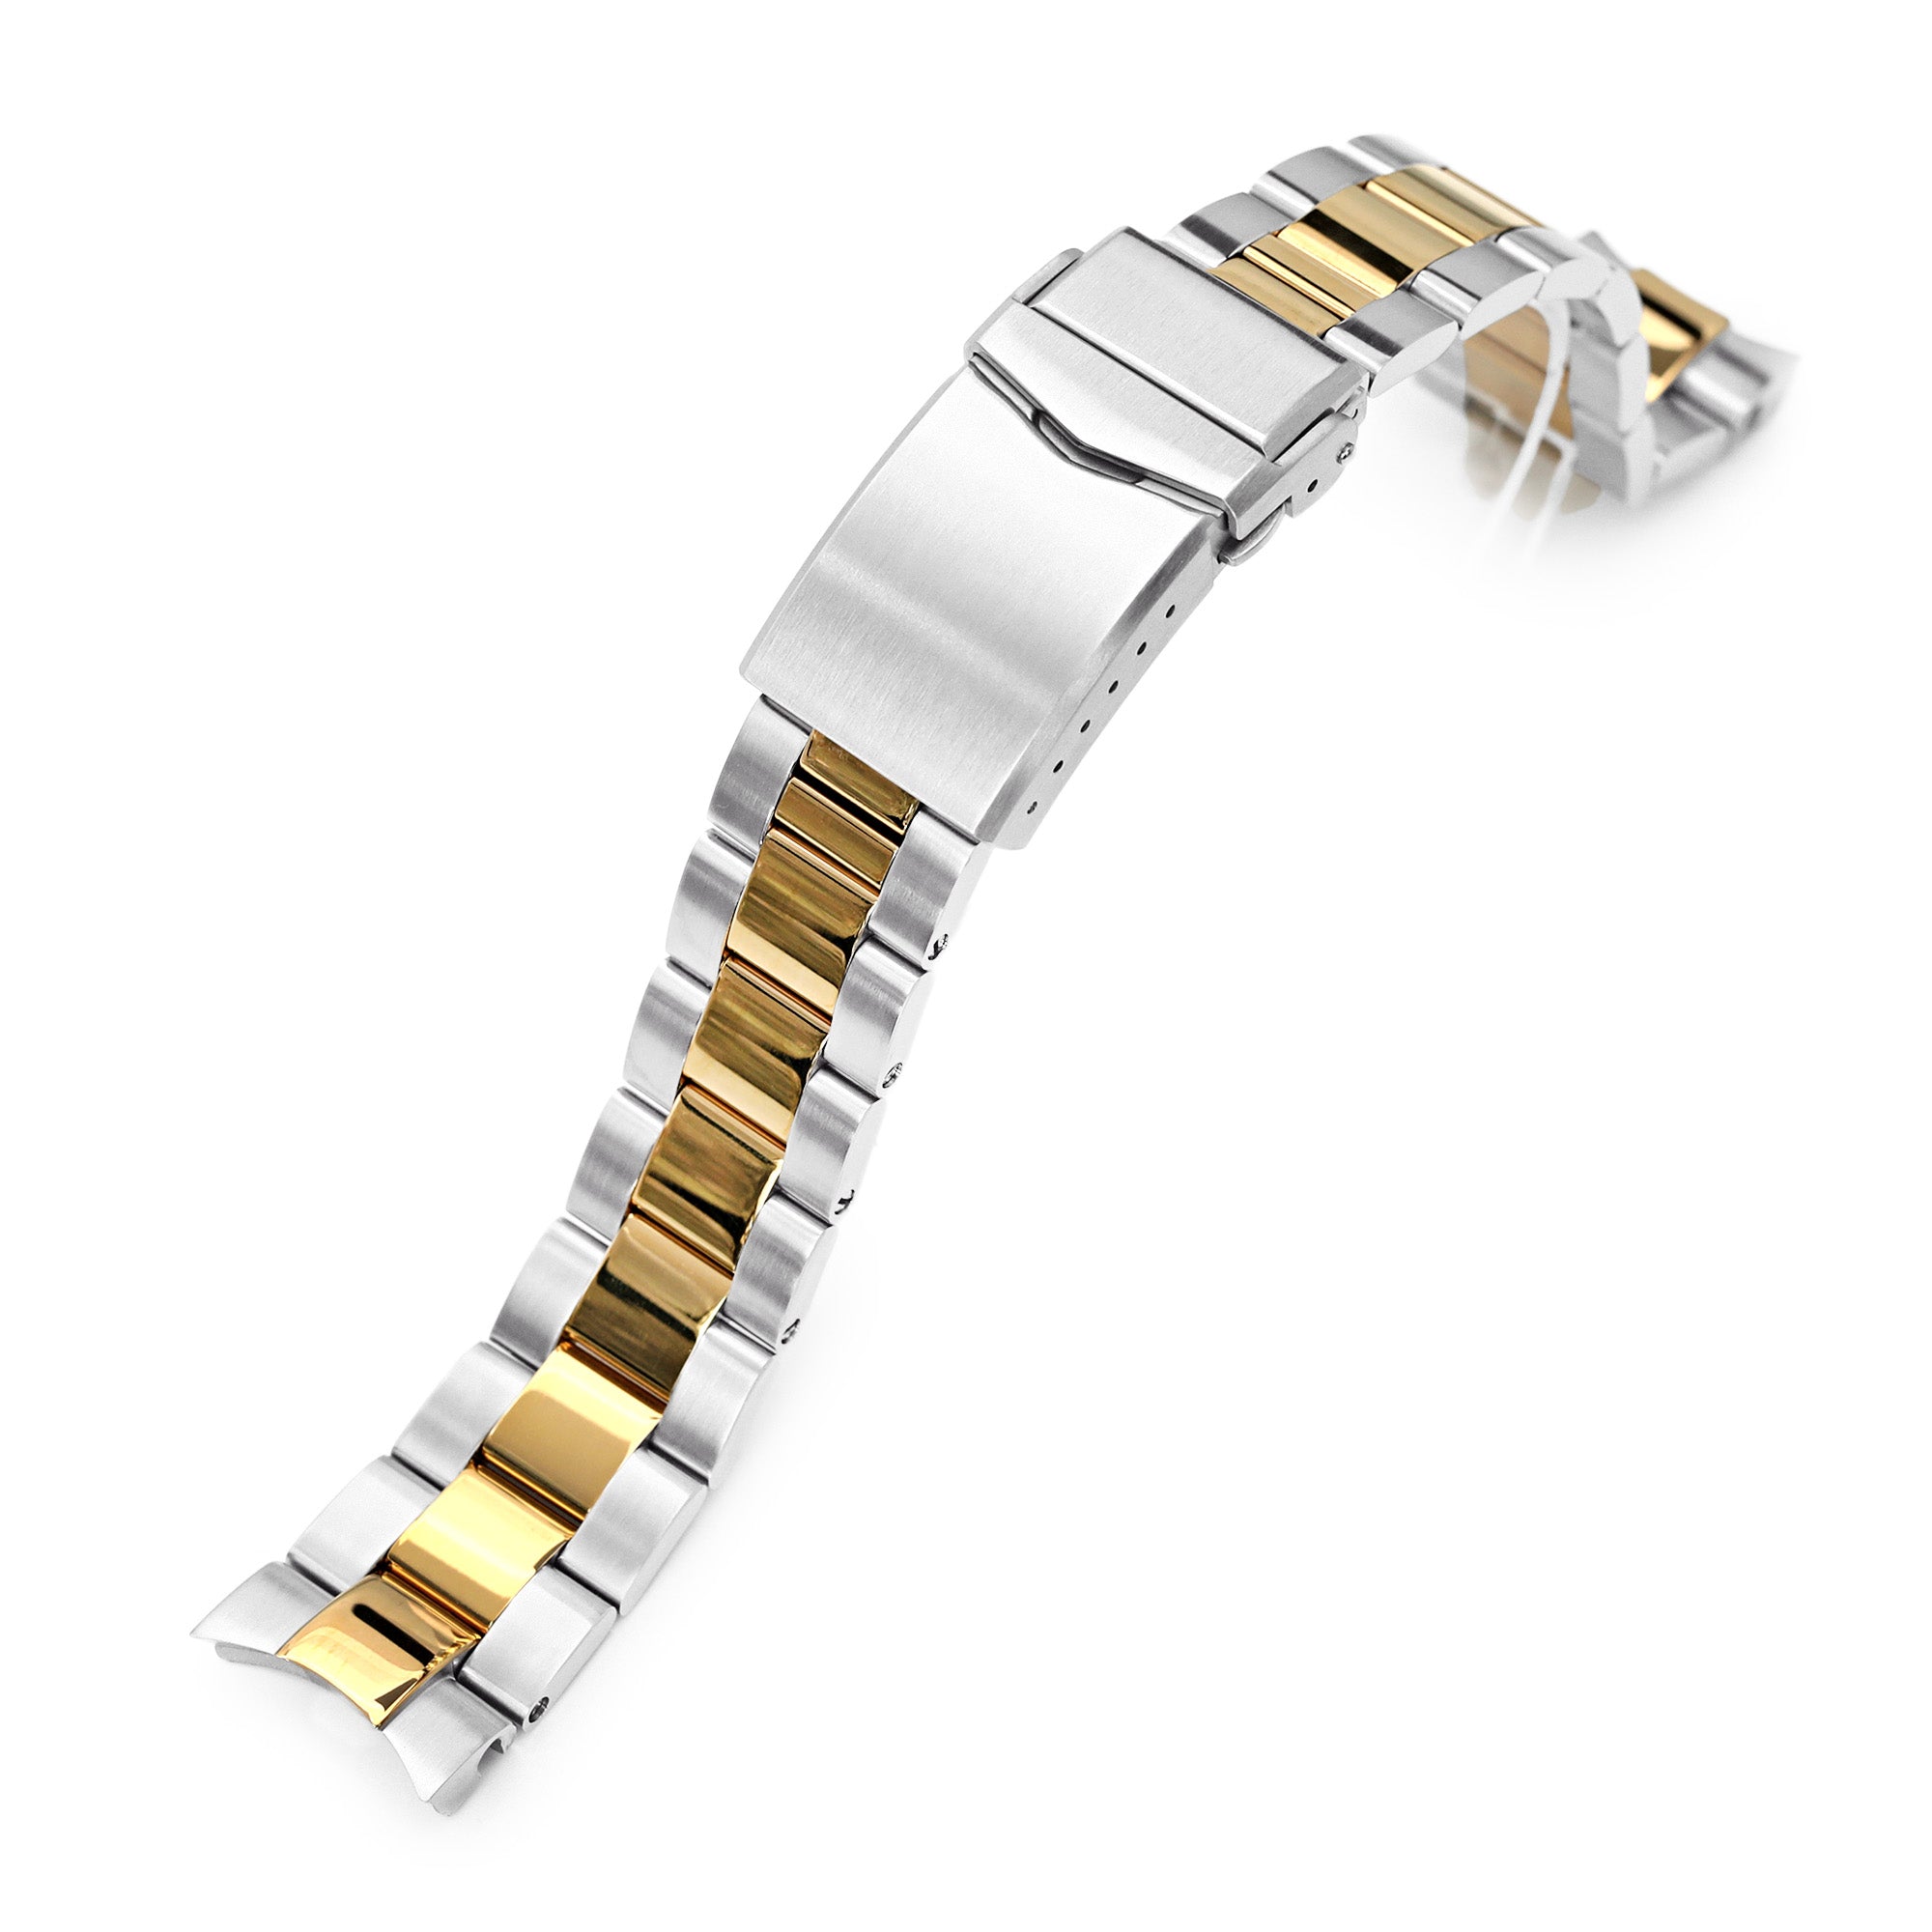 20mm Super-O Boyer 316L Stainless Steel Watch Bracelet for Seiko Alpinist SARB017, Two Tone IP Gold V-Clasp Strapcode Watch Bands